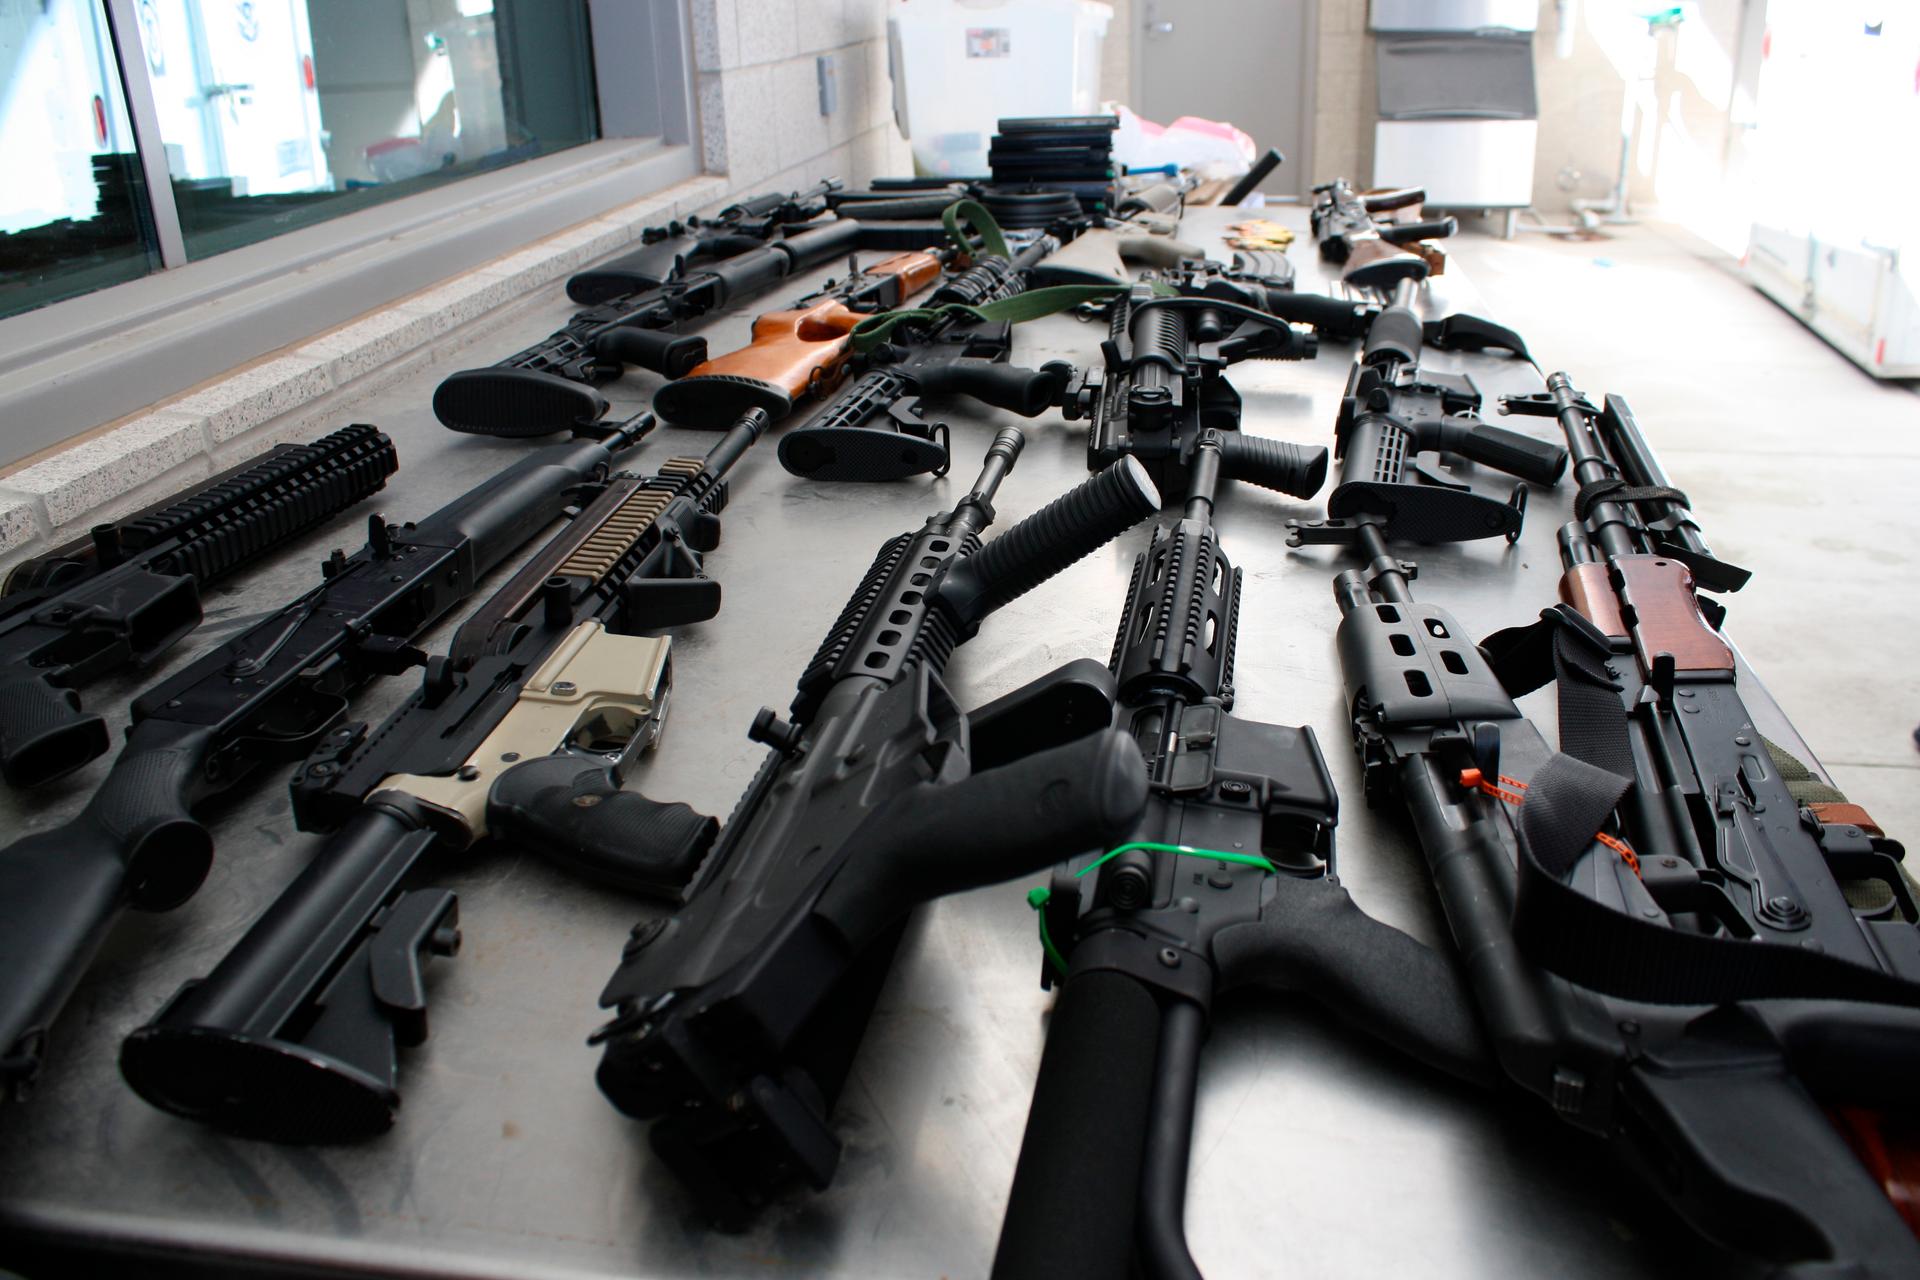 A cache of weapons seized from a vehicle from an outbound (southbound) examination at Del Rio International Bridge as seen in this U.S. Customs and Border Protection (CBP) handout photograph taken February 1, 2011. U.S. customs agents in Texas seized 14 h